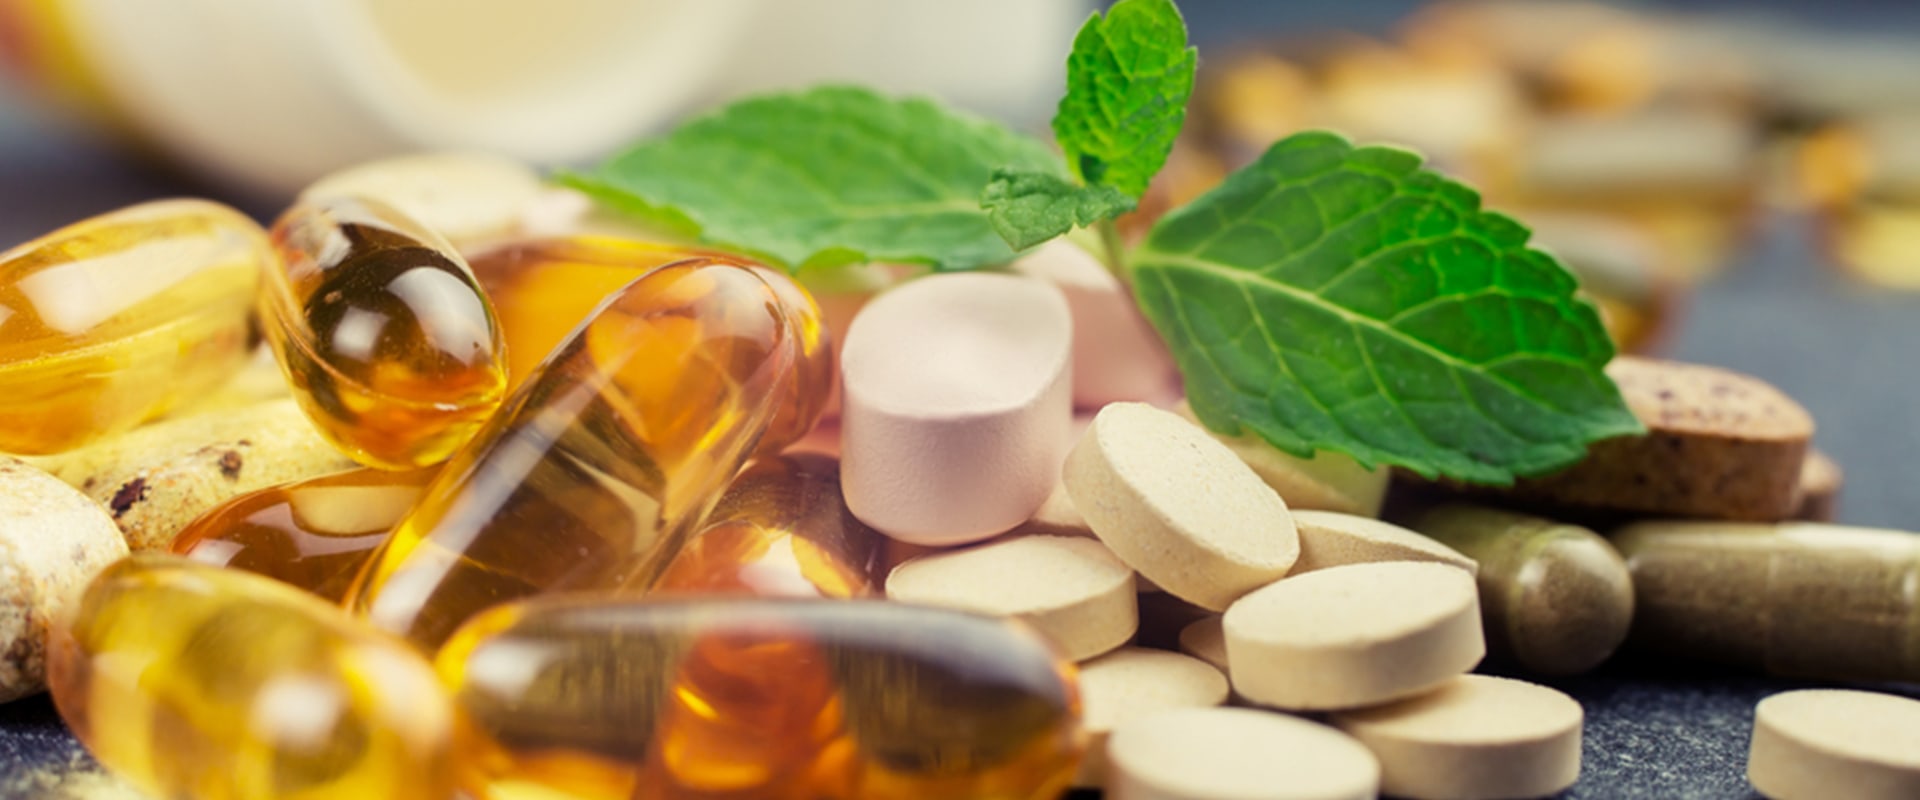 Are You Getting Enough Vitamins and Supplements in Your Diet?